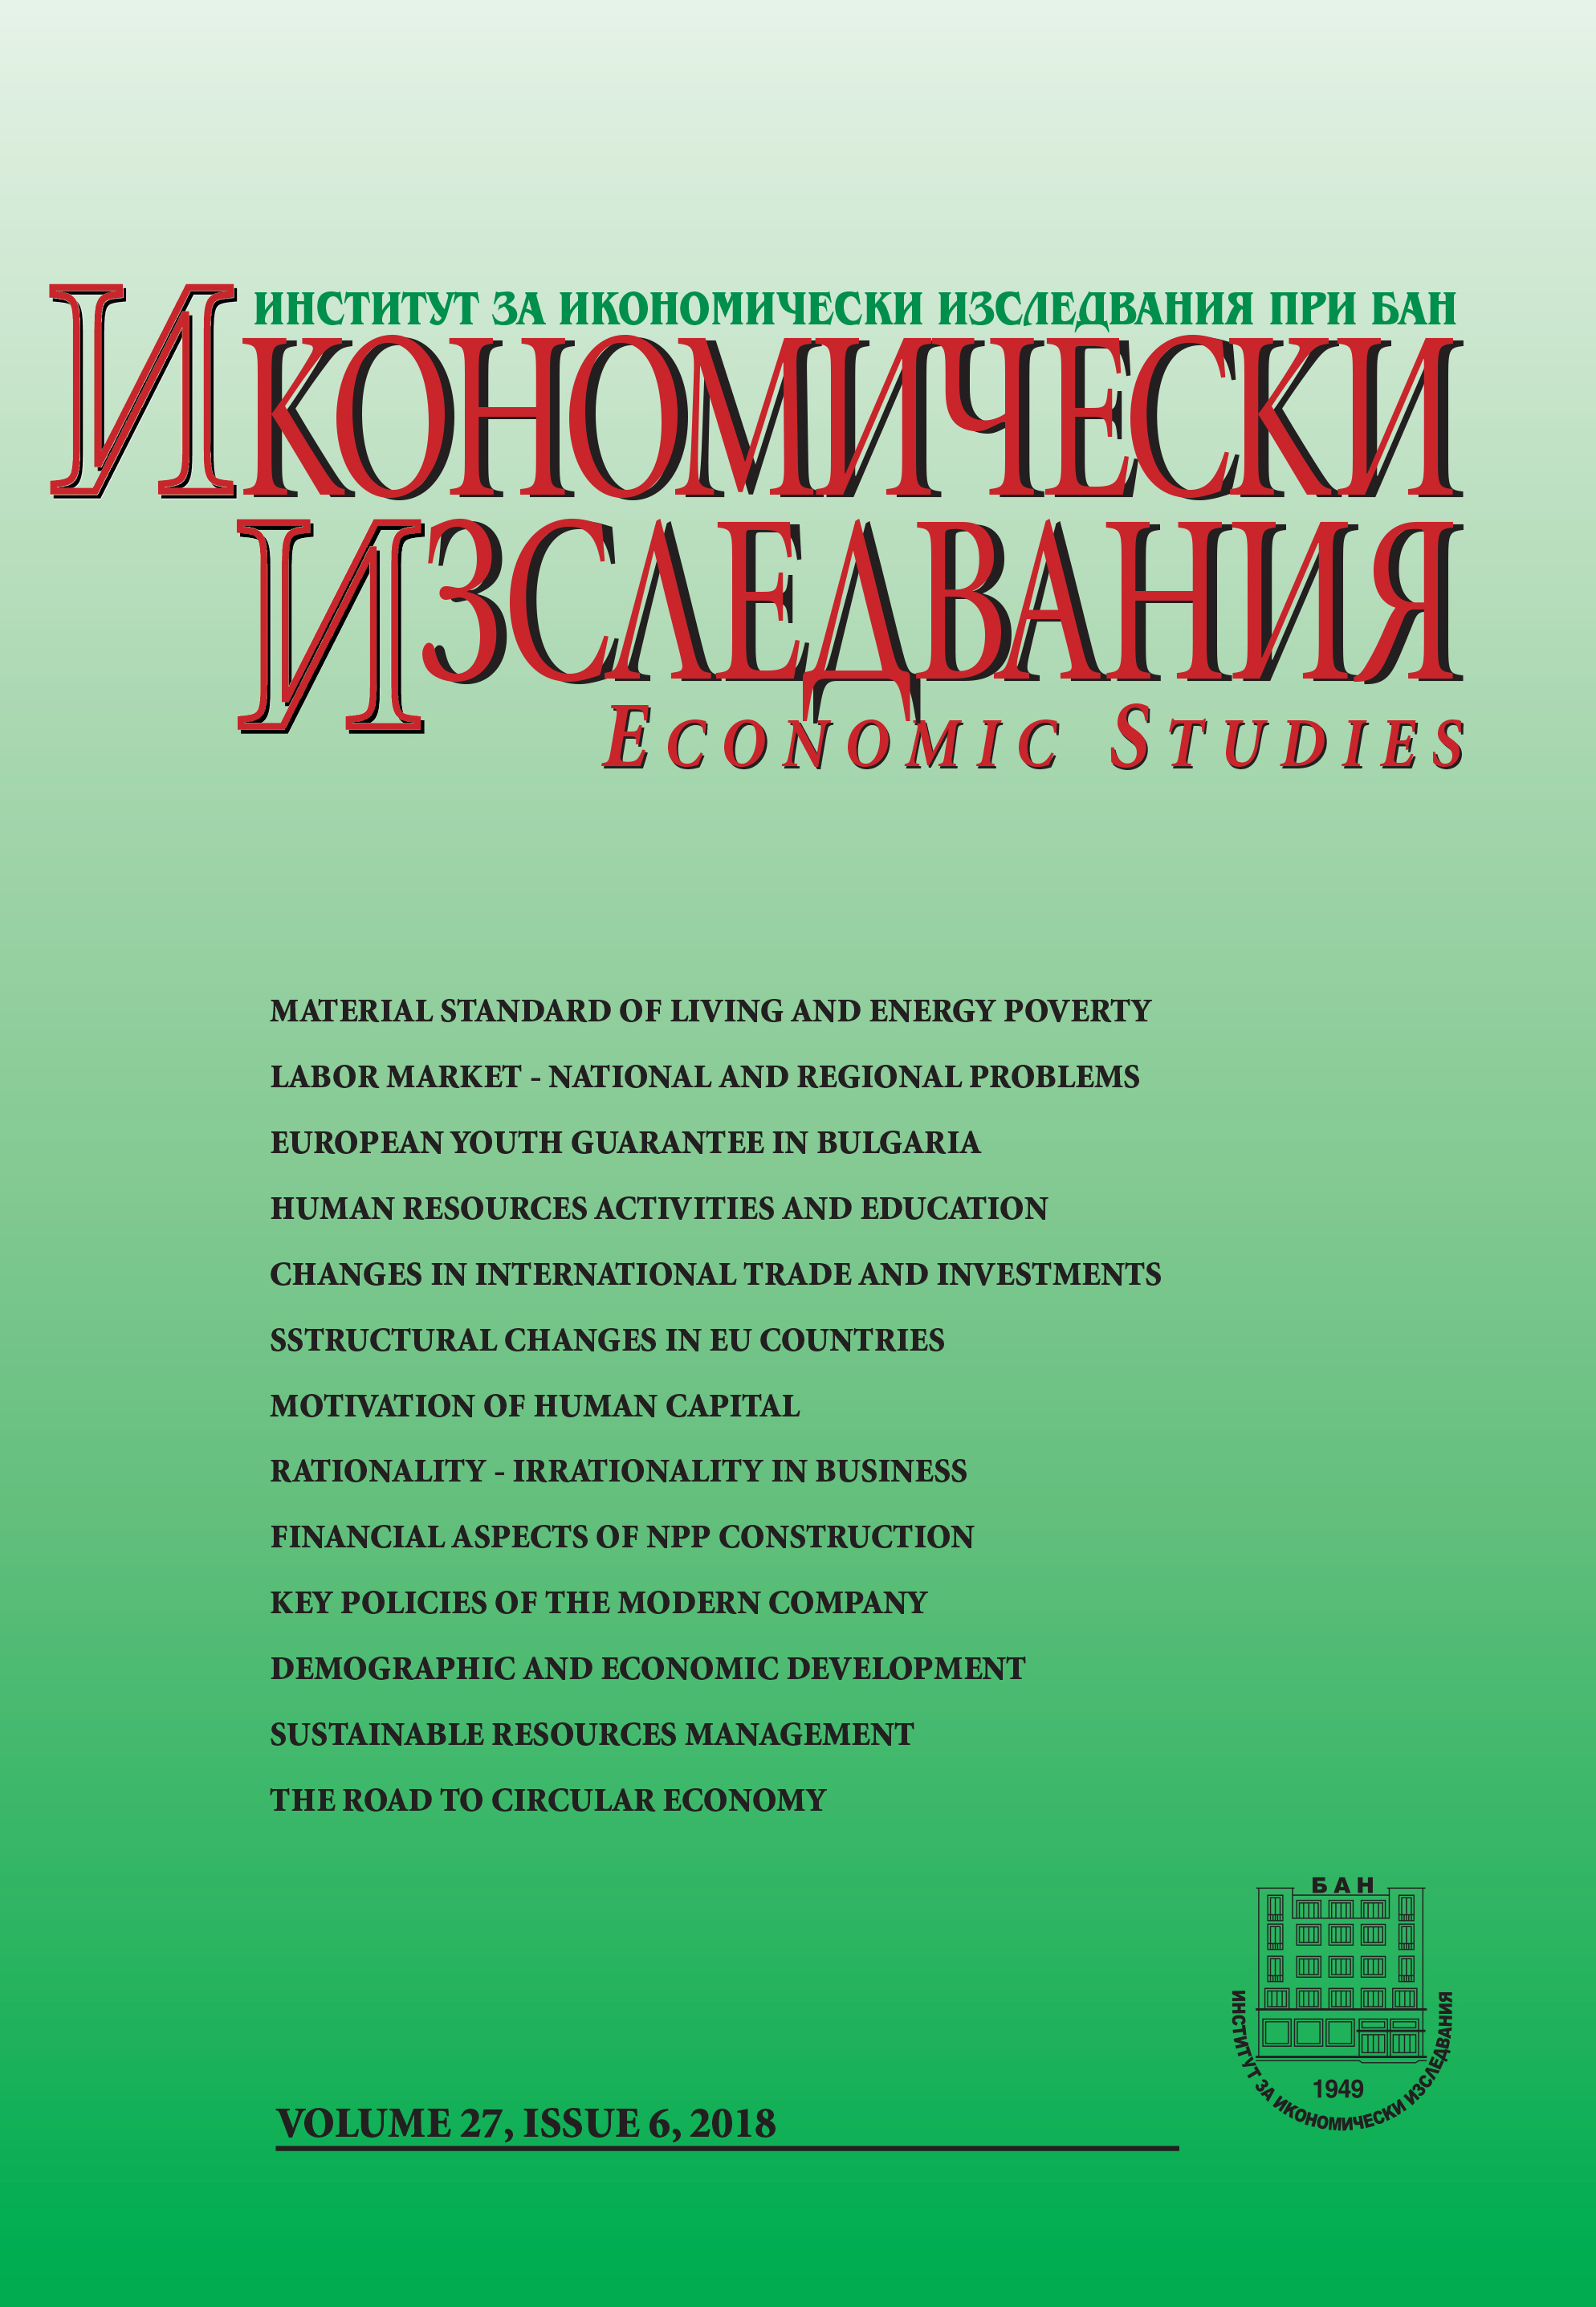 Demographic Development of Bulgaria in a Regional Plan as a Basis for Economic Development Cover Image